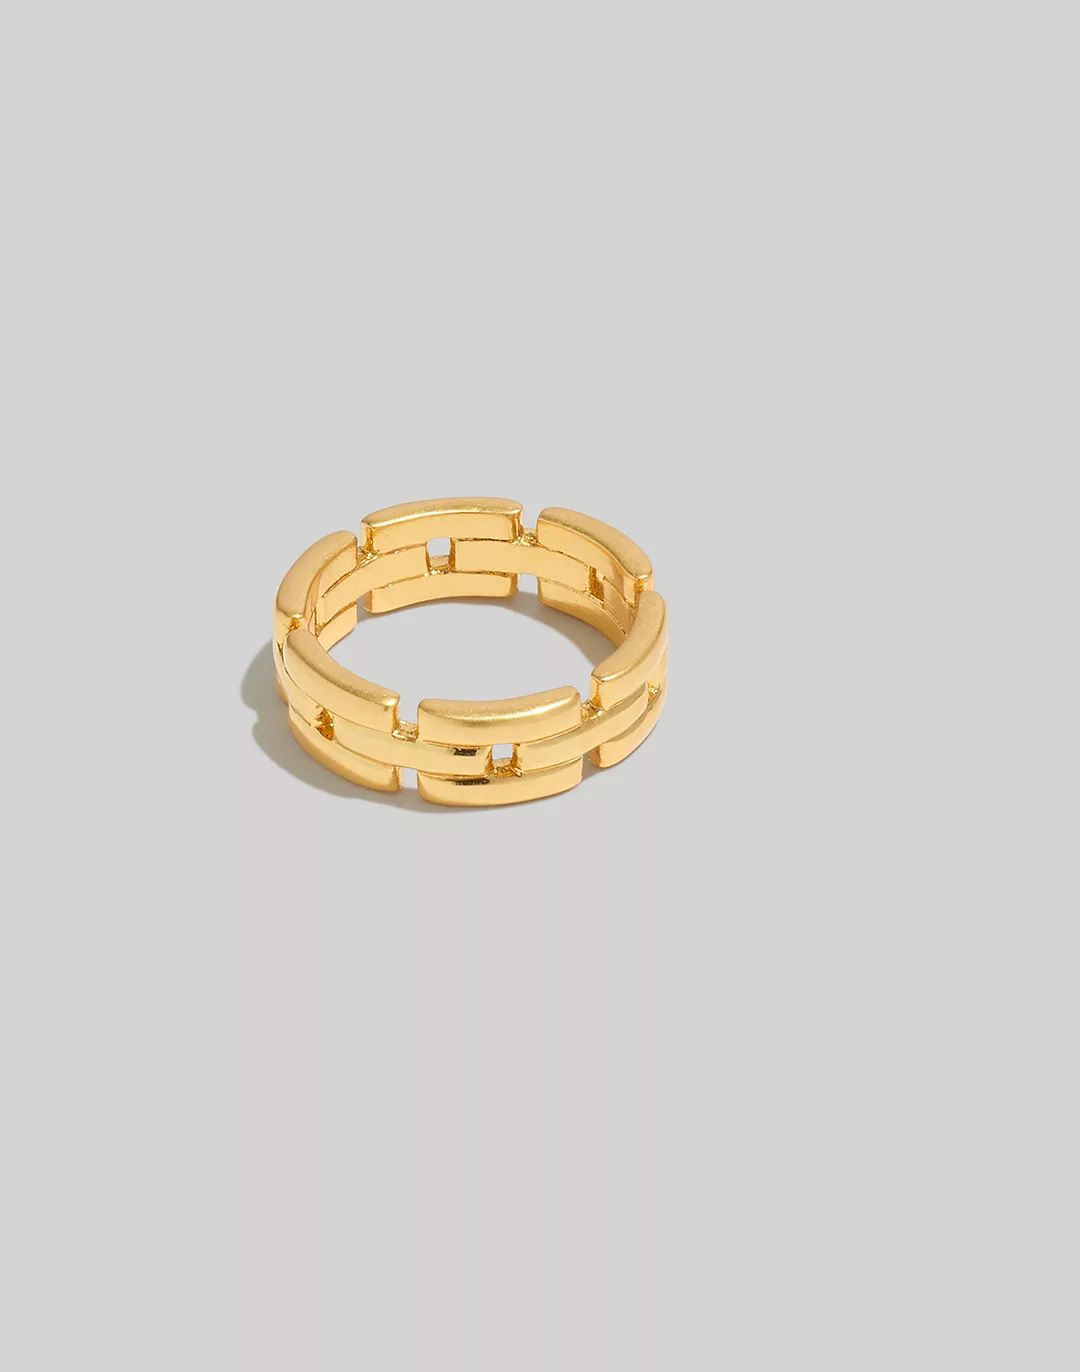 Watch Chain Statement Ring | Madewell